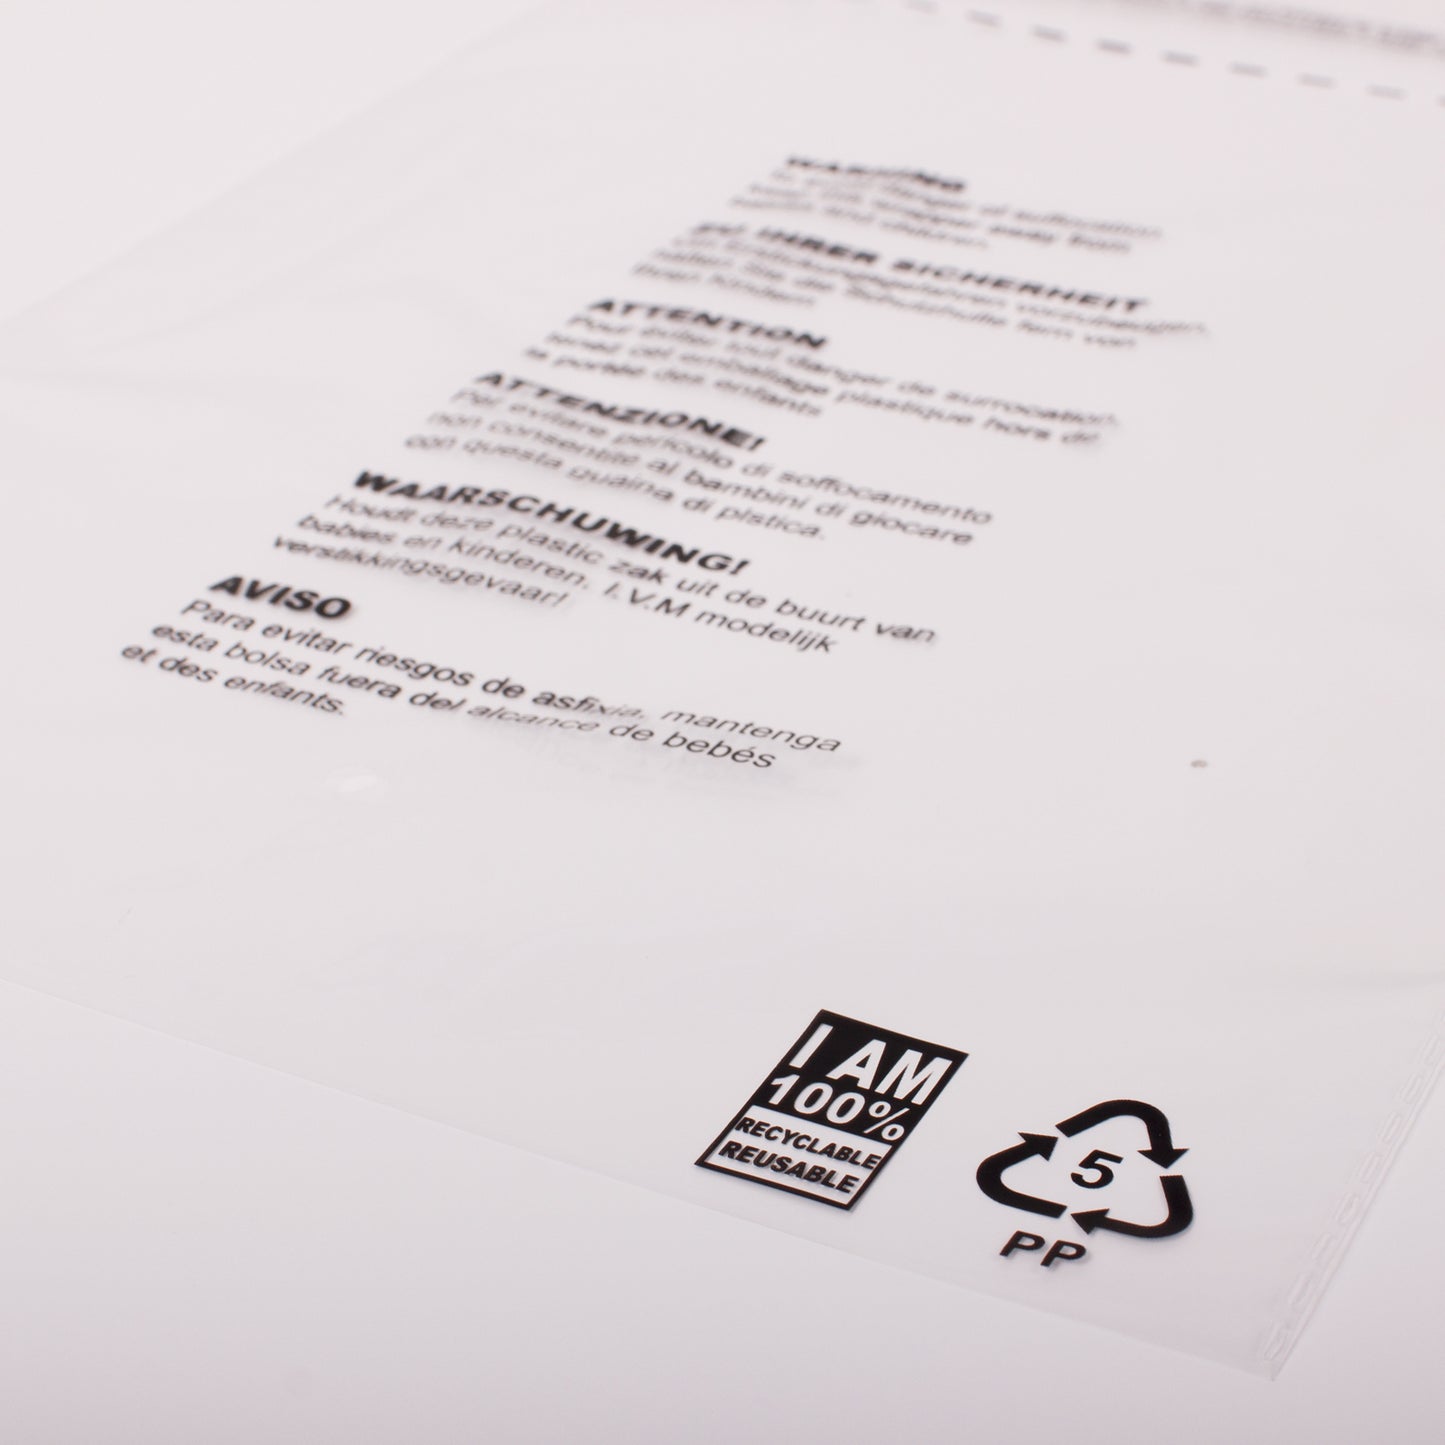 12 x 16 Clear Mailing Bag with 'I AM 100% RECYCLABLE'